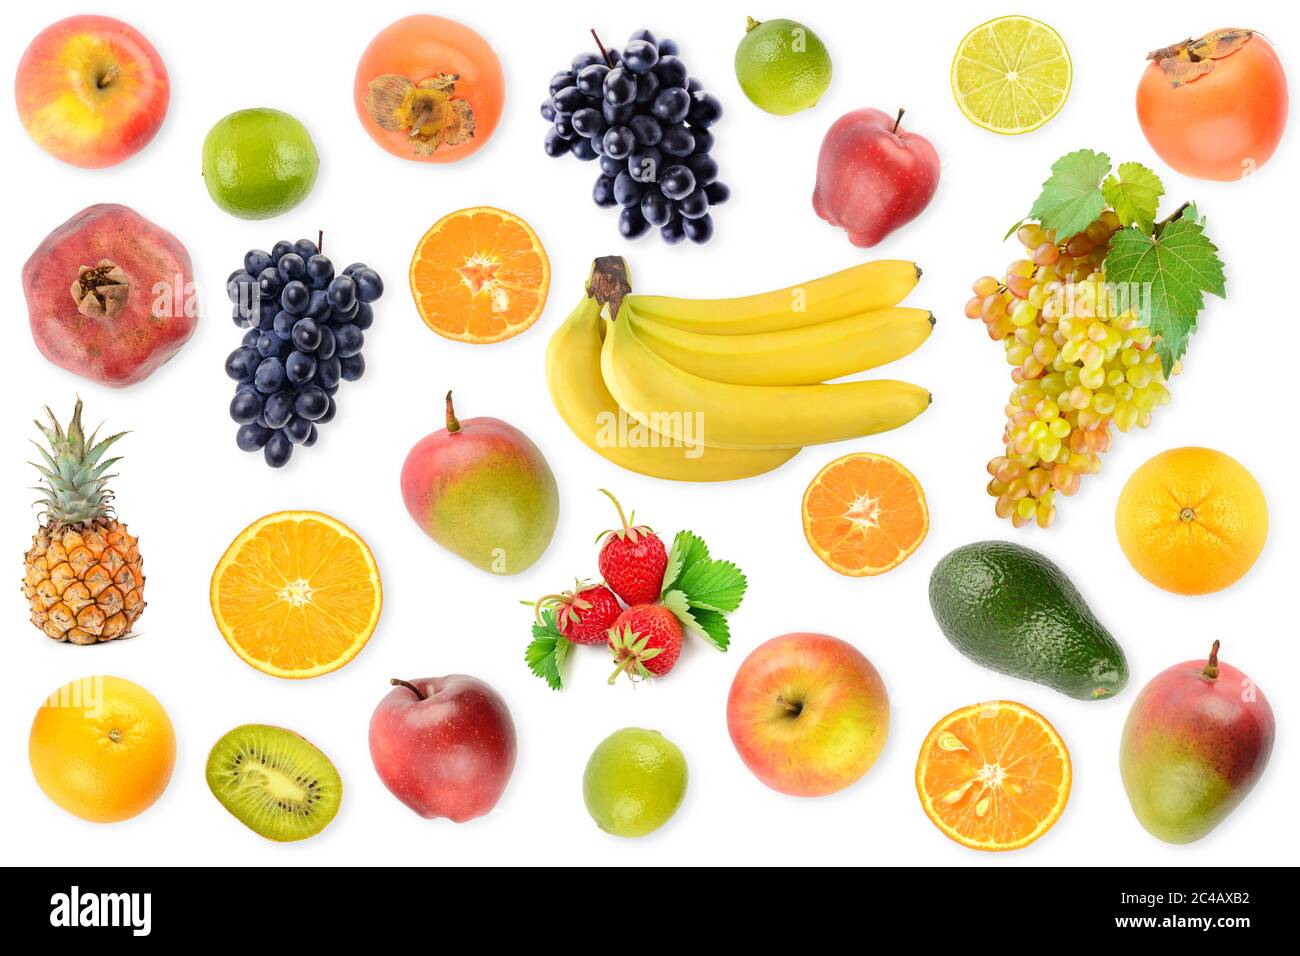 Large collection fruits and berries close-up isolated on white background. Top view. Stock Photo